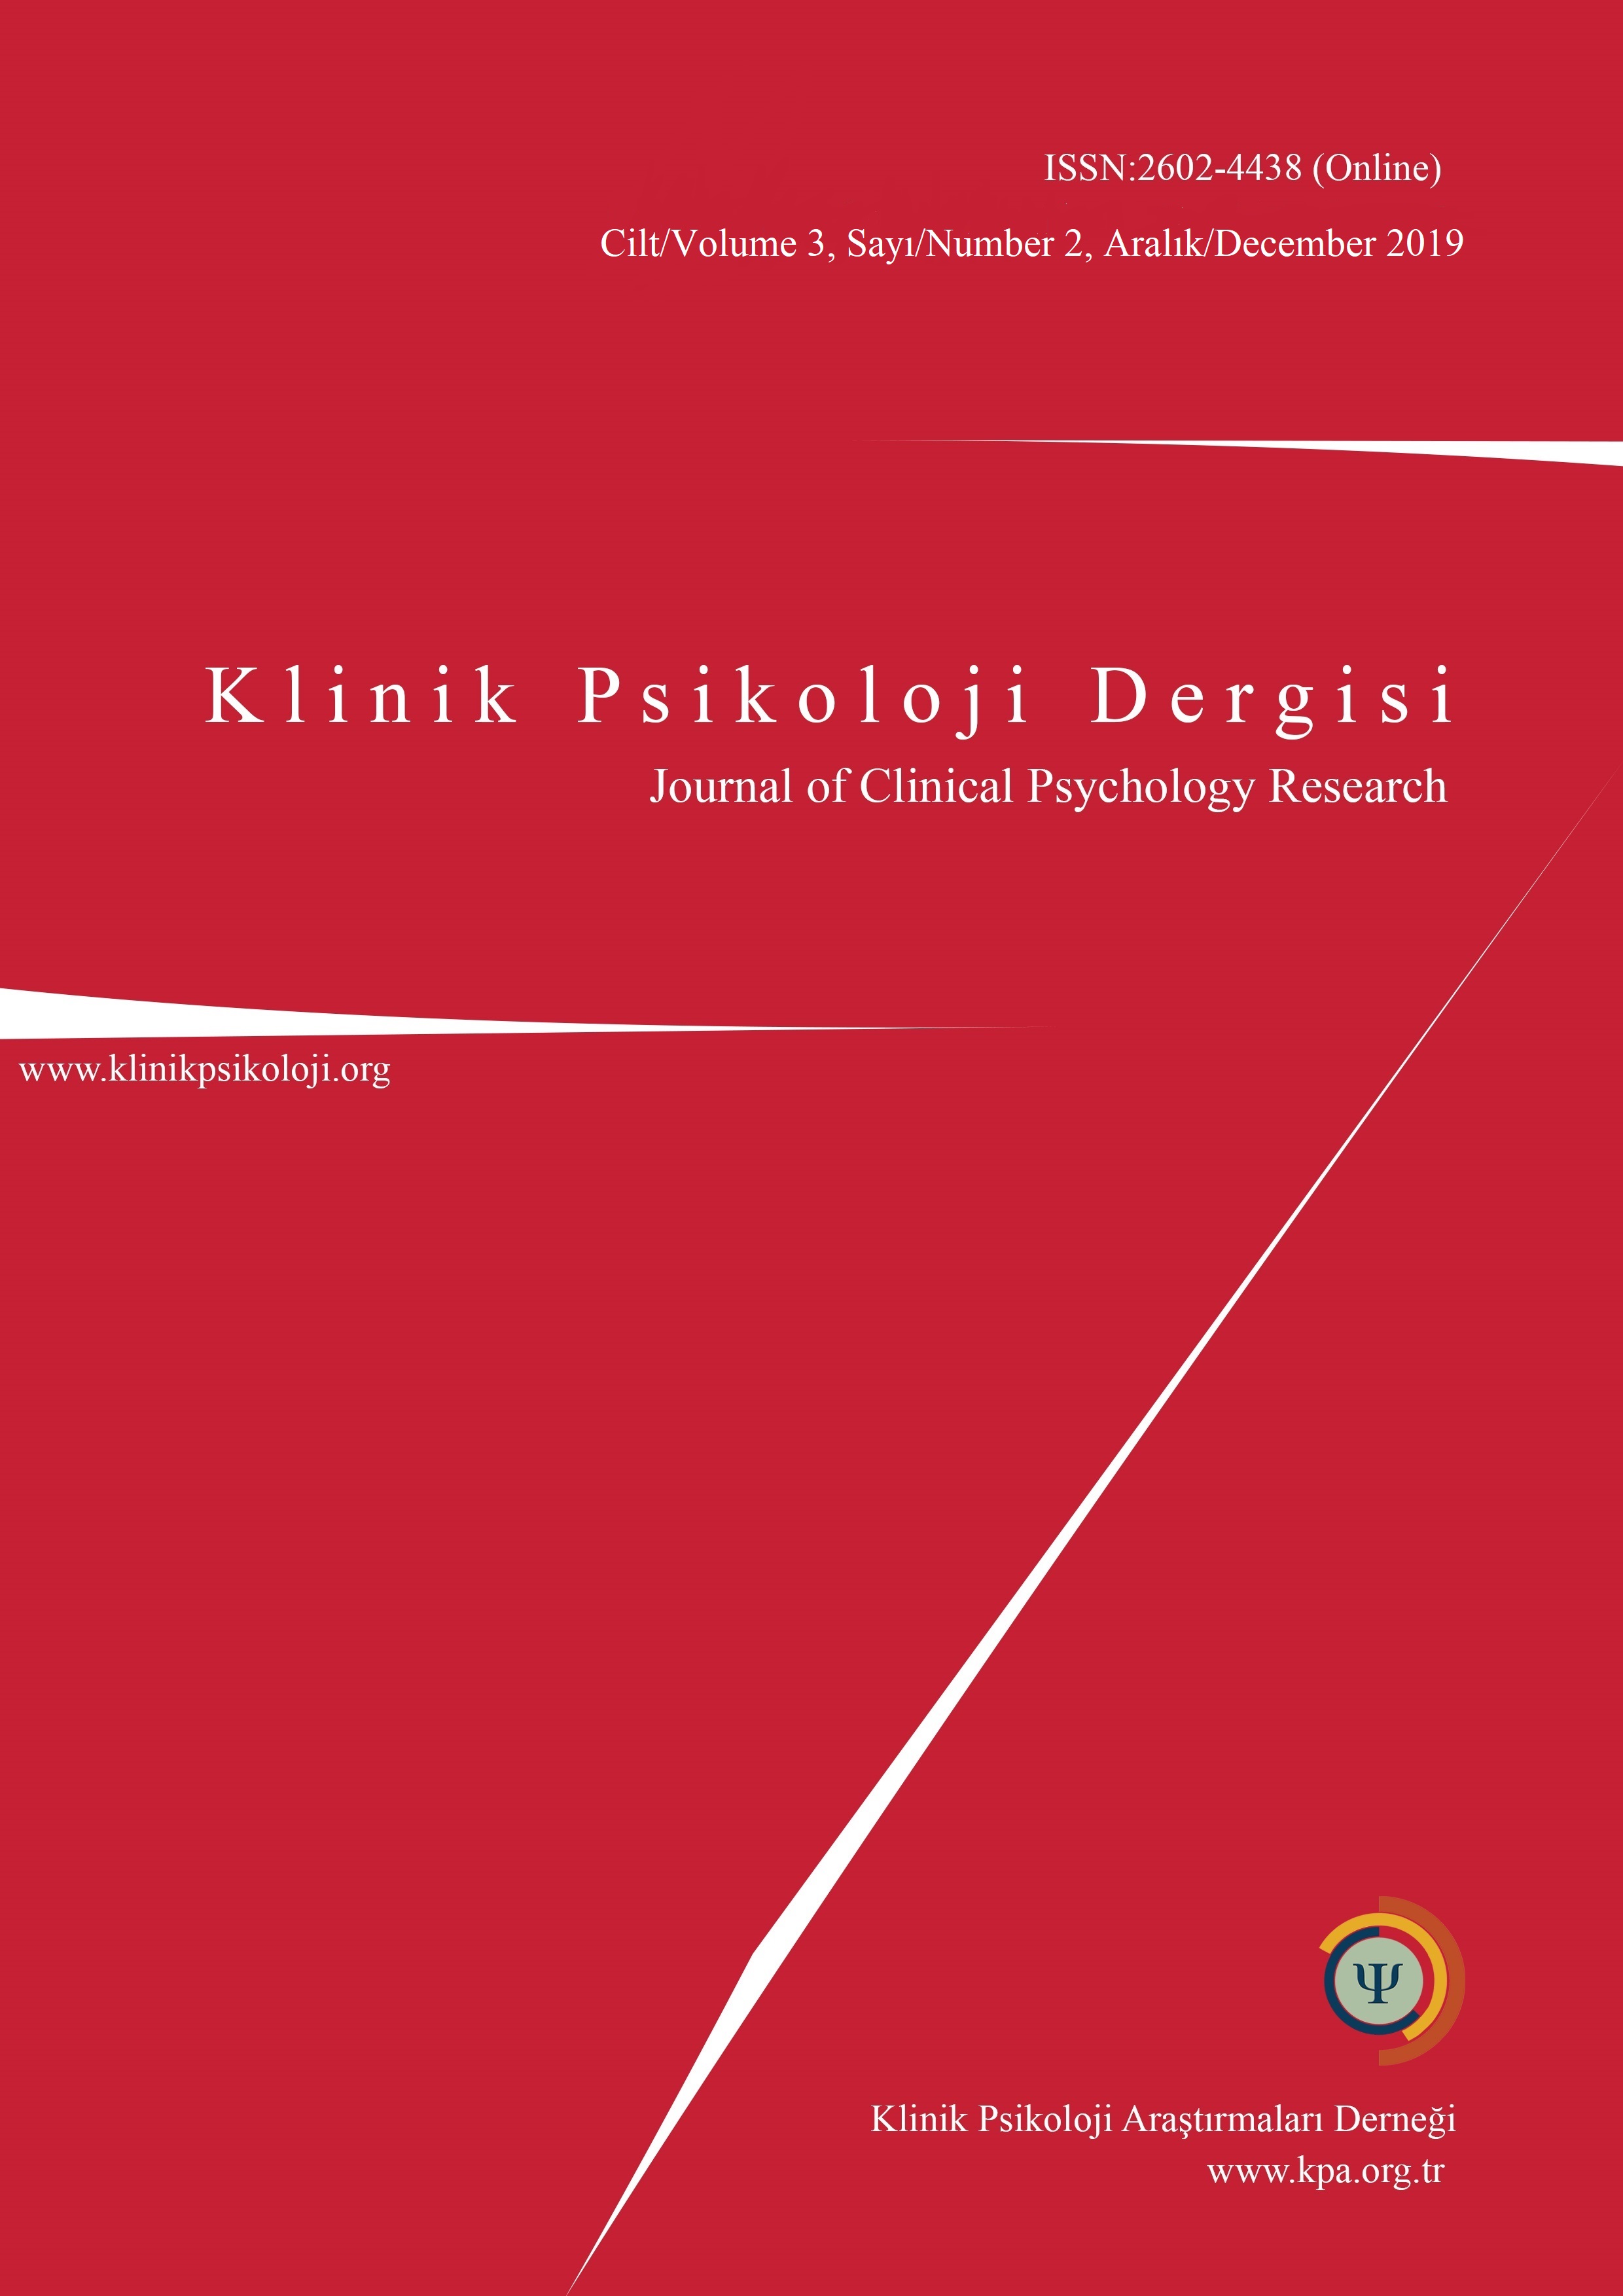 The Turkish validity and reliability study of Intimate Partner Violence Strategies Index (IPVSI) Cover Image